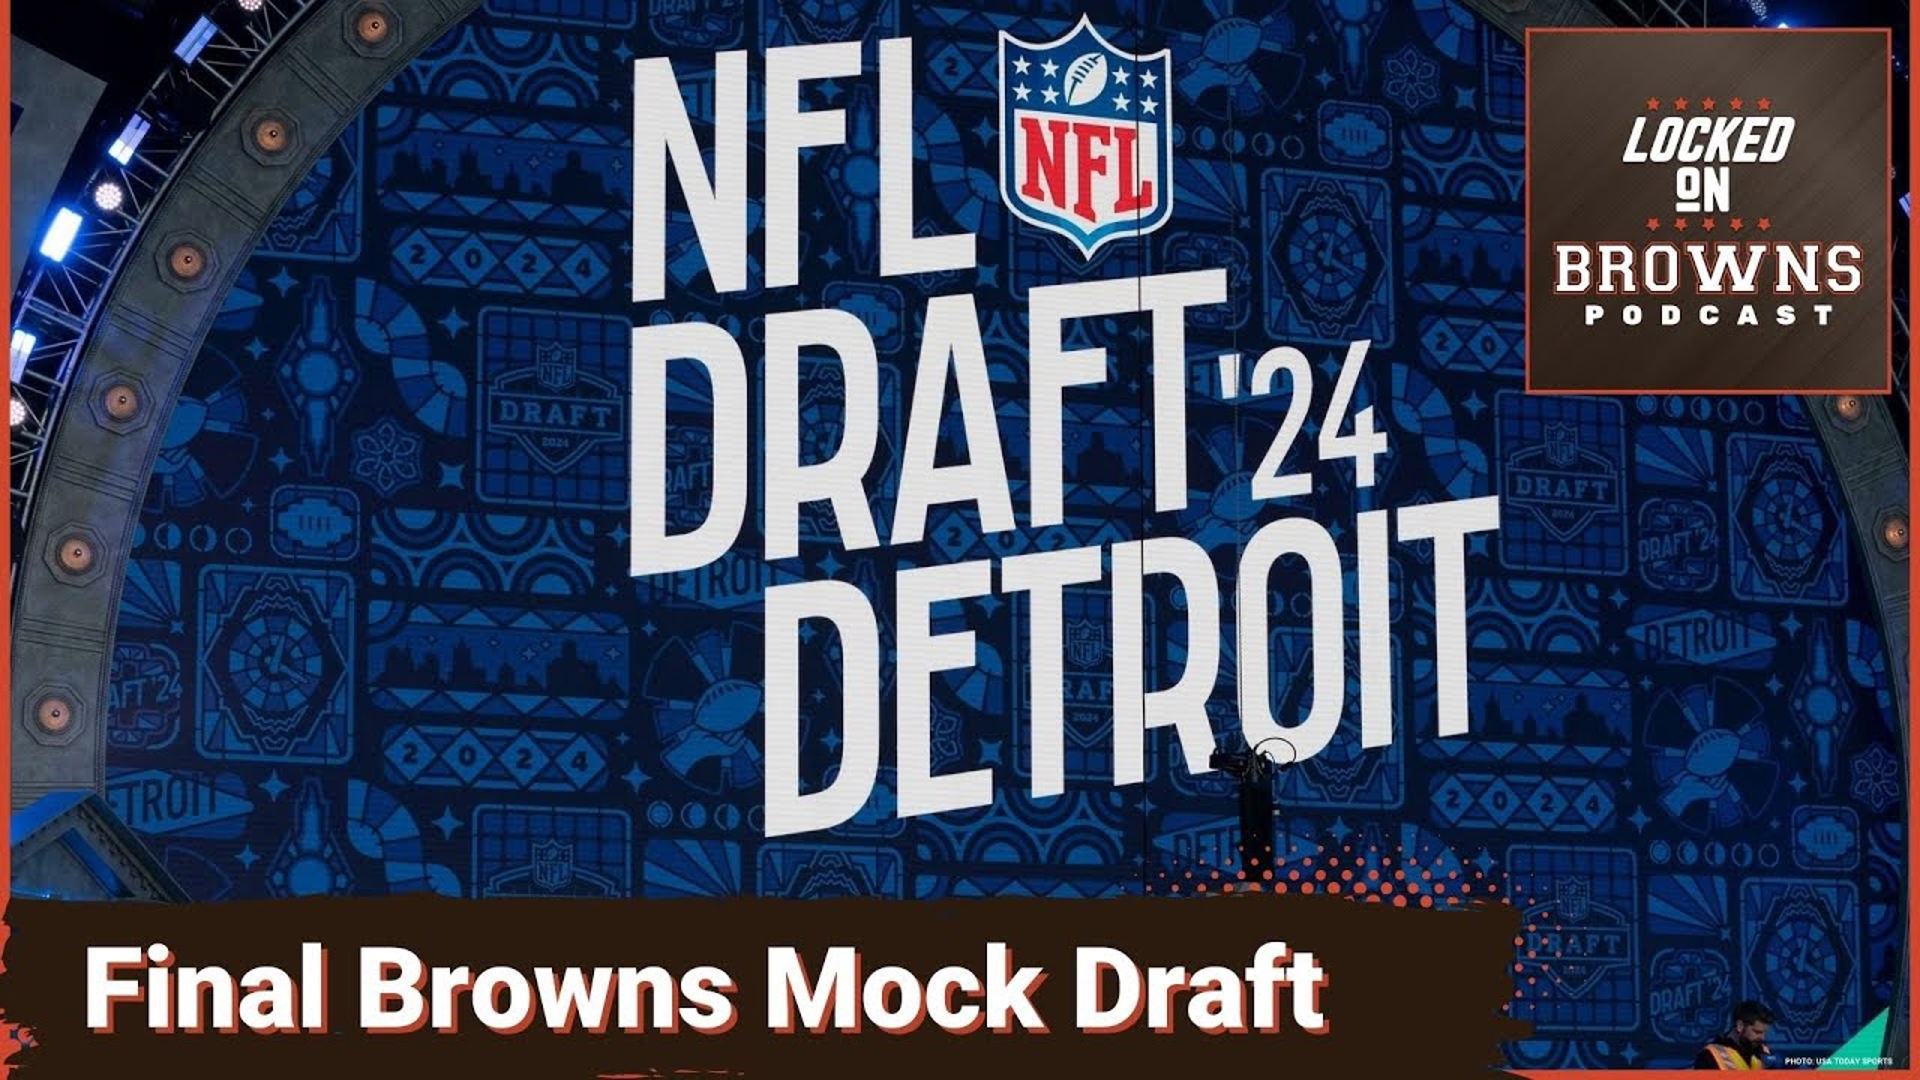 Host Jeff Lloyd delivers his final Browns mock draft before the draft kicks off on Thursday.